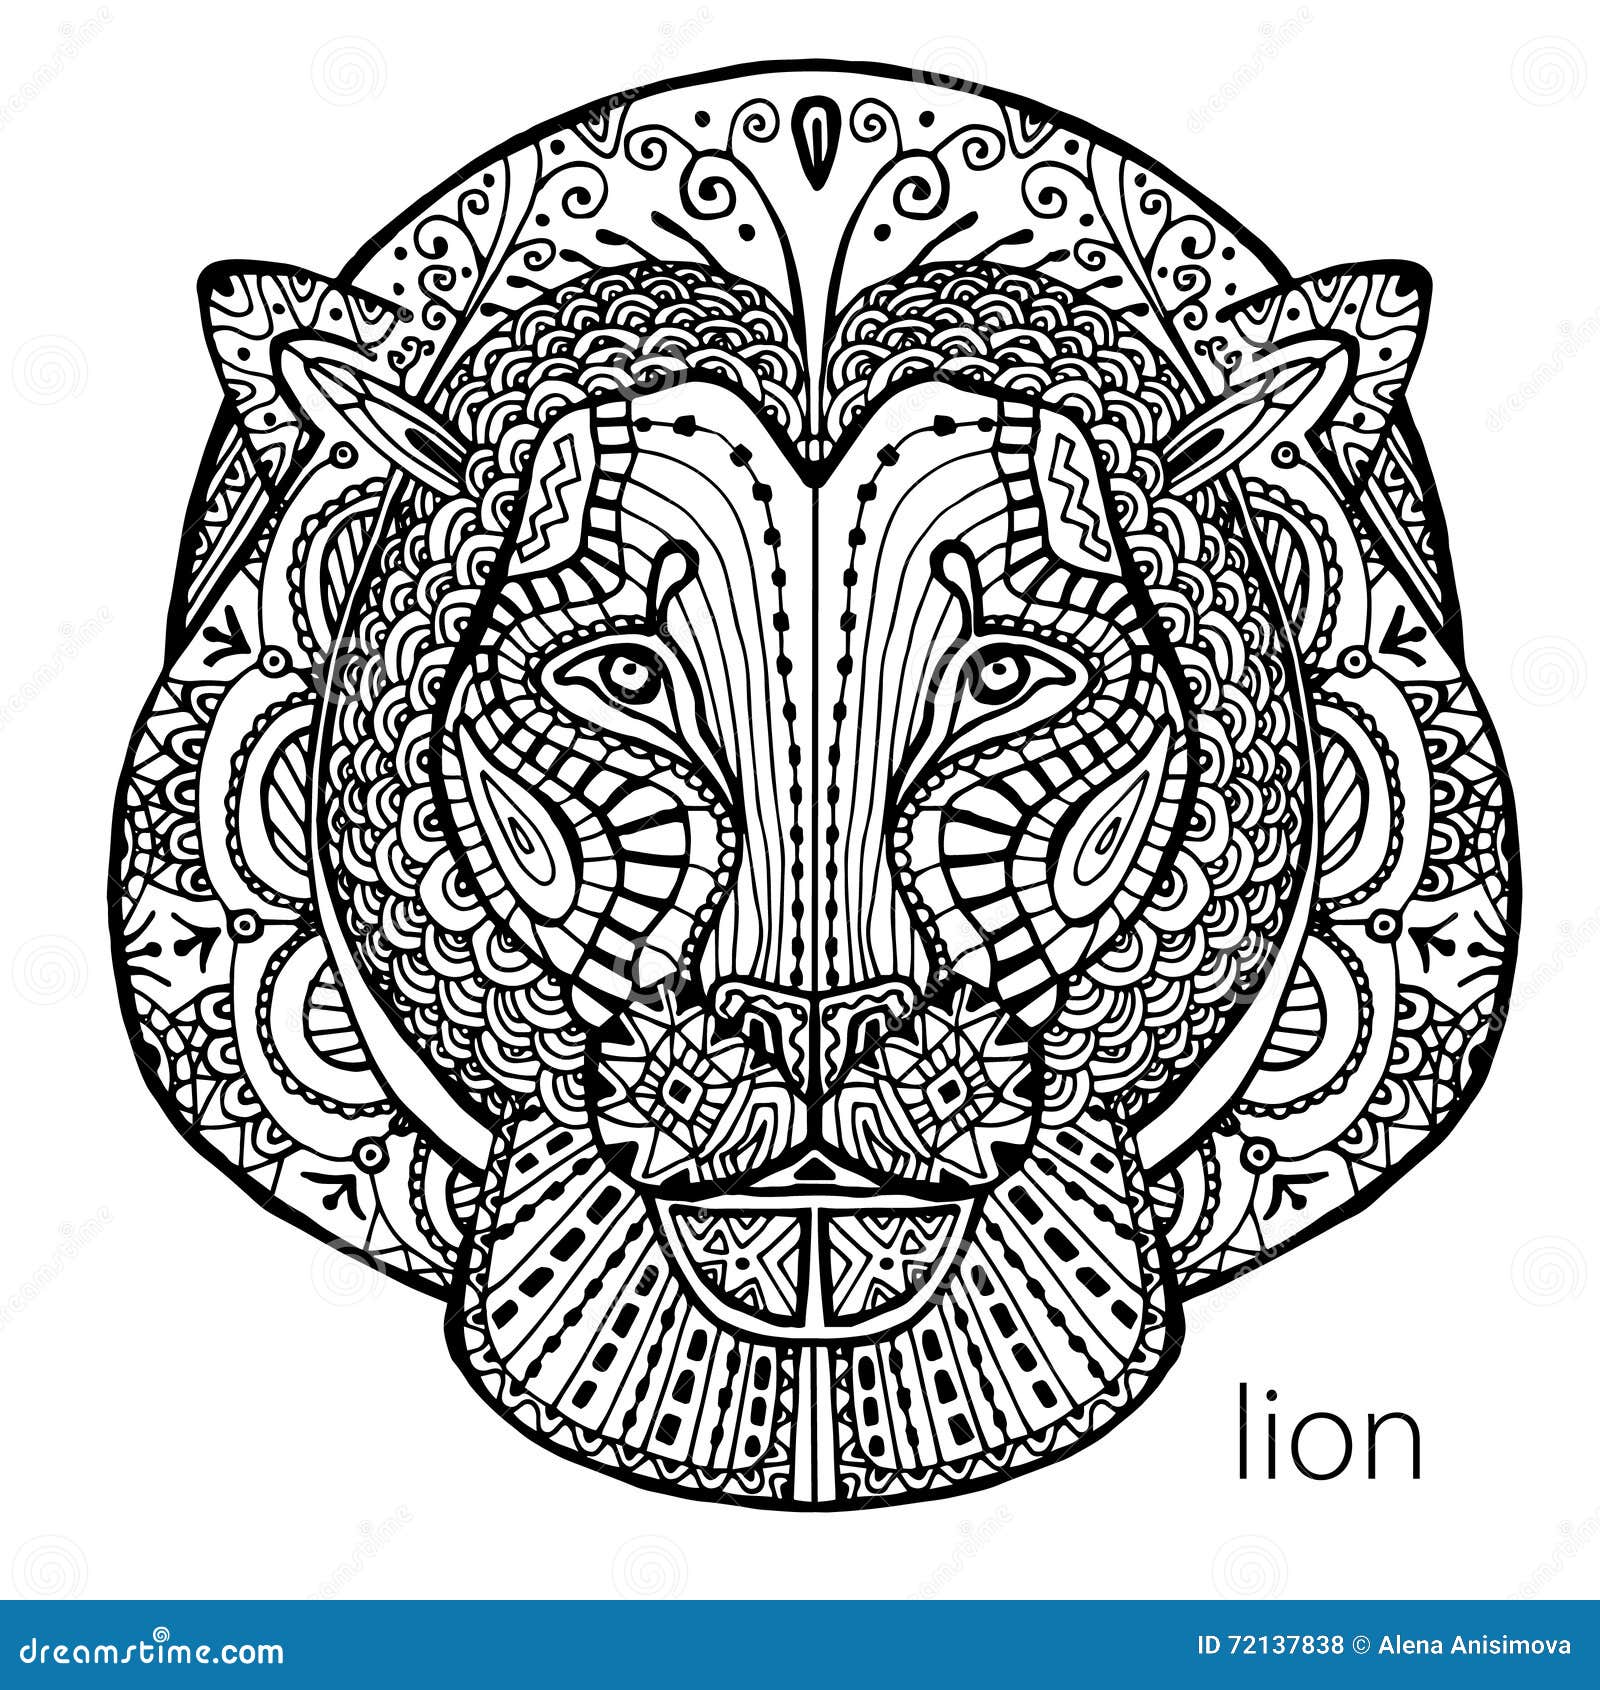 Lion coloring for adults antistress hand drawn Vector Image